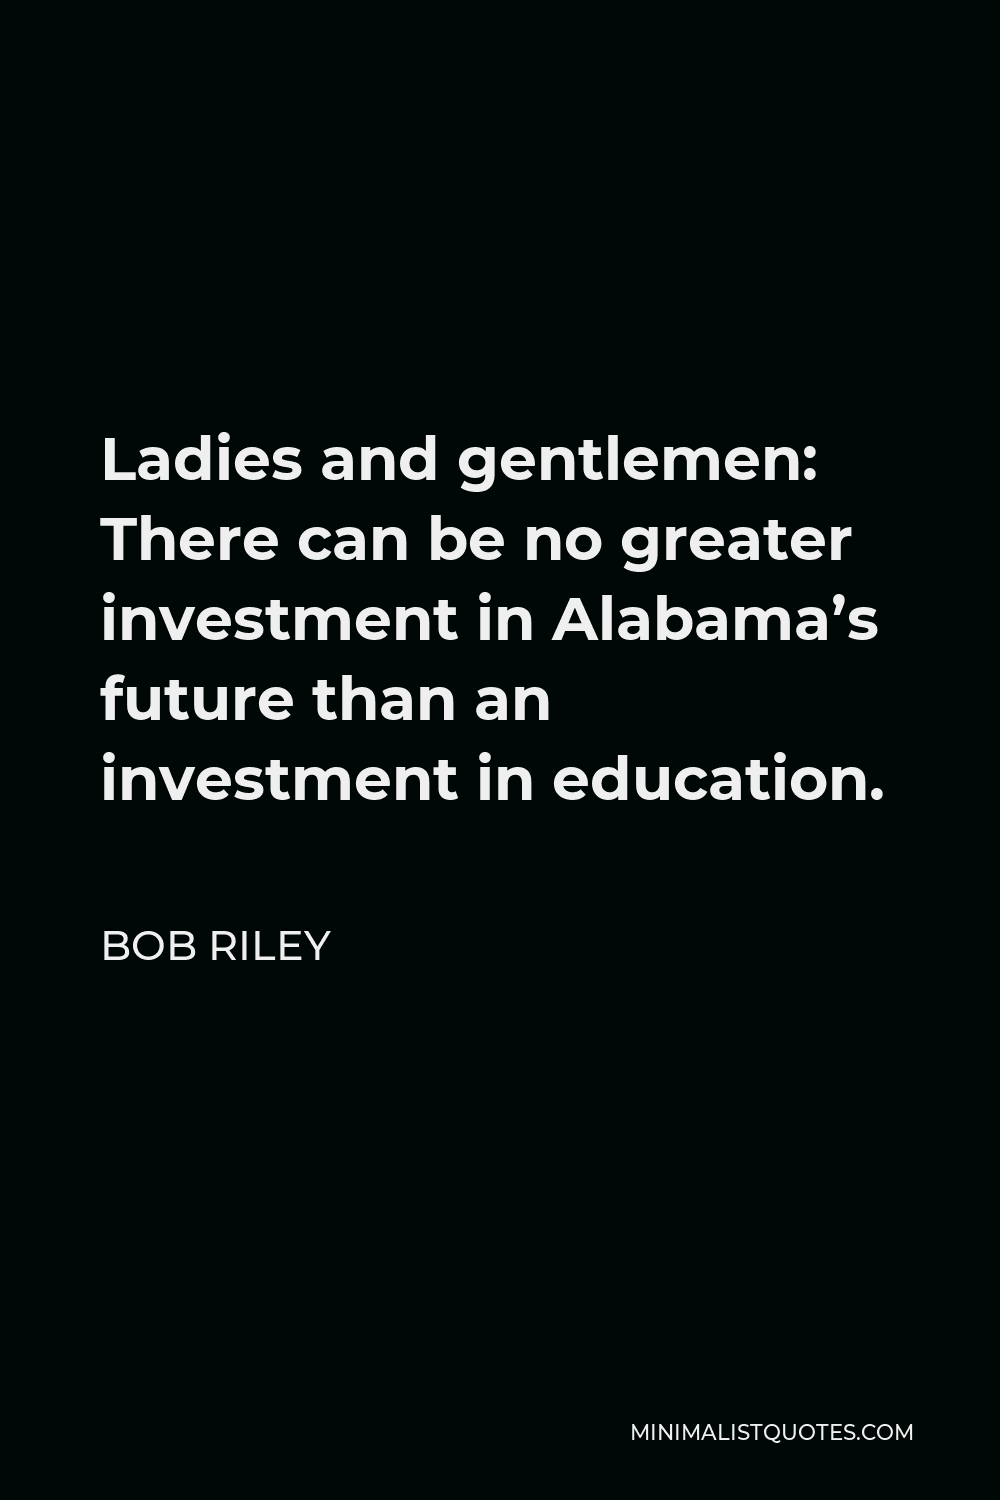 Bob Riley Quote - Ladies and gentlemen: There can be no greater investment in Alabama’s future than an investment in education.